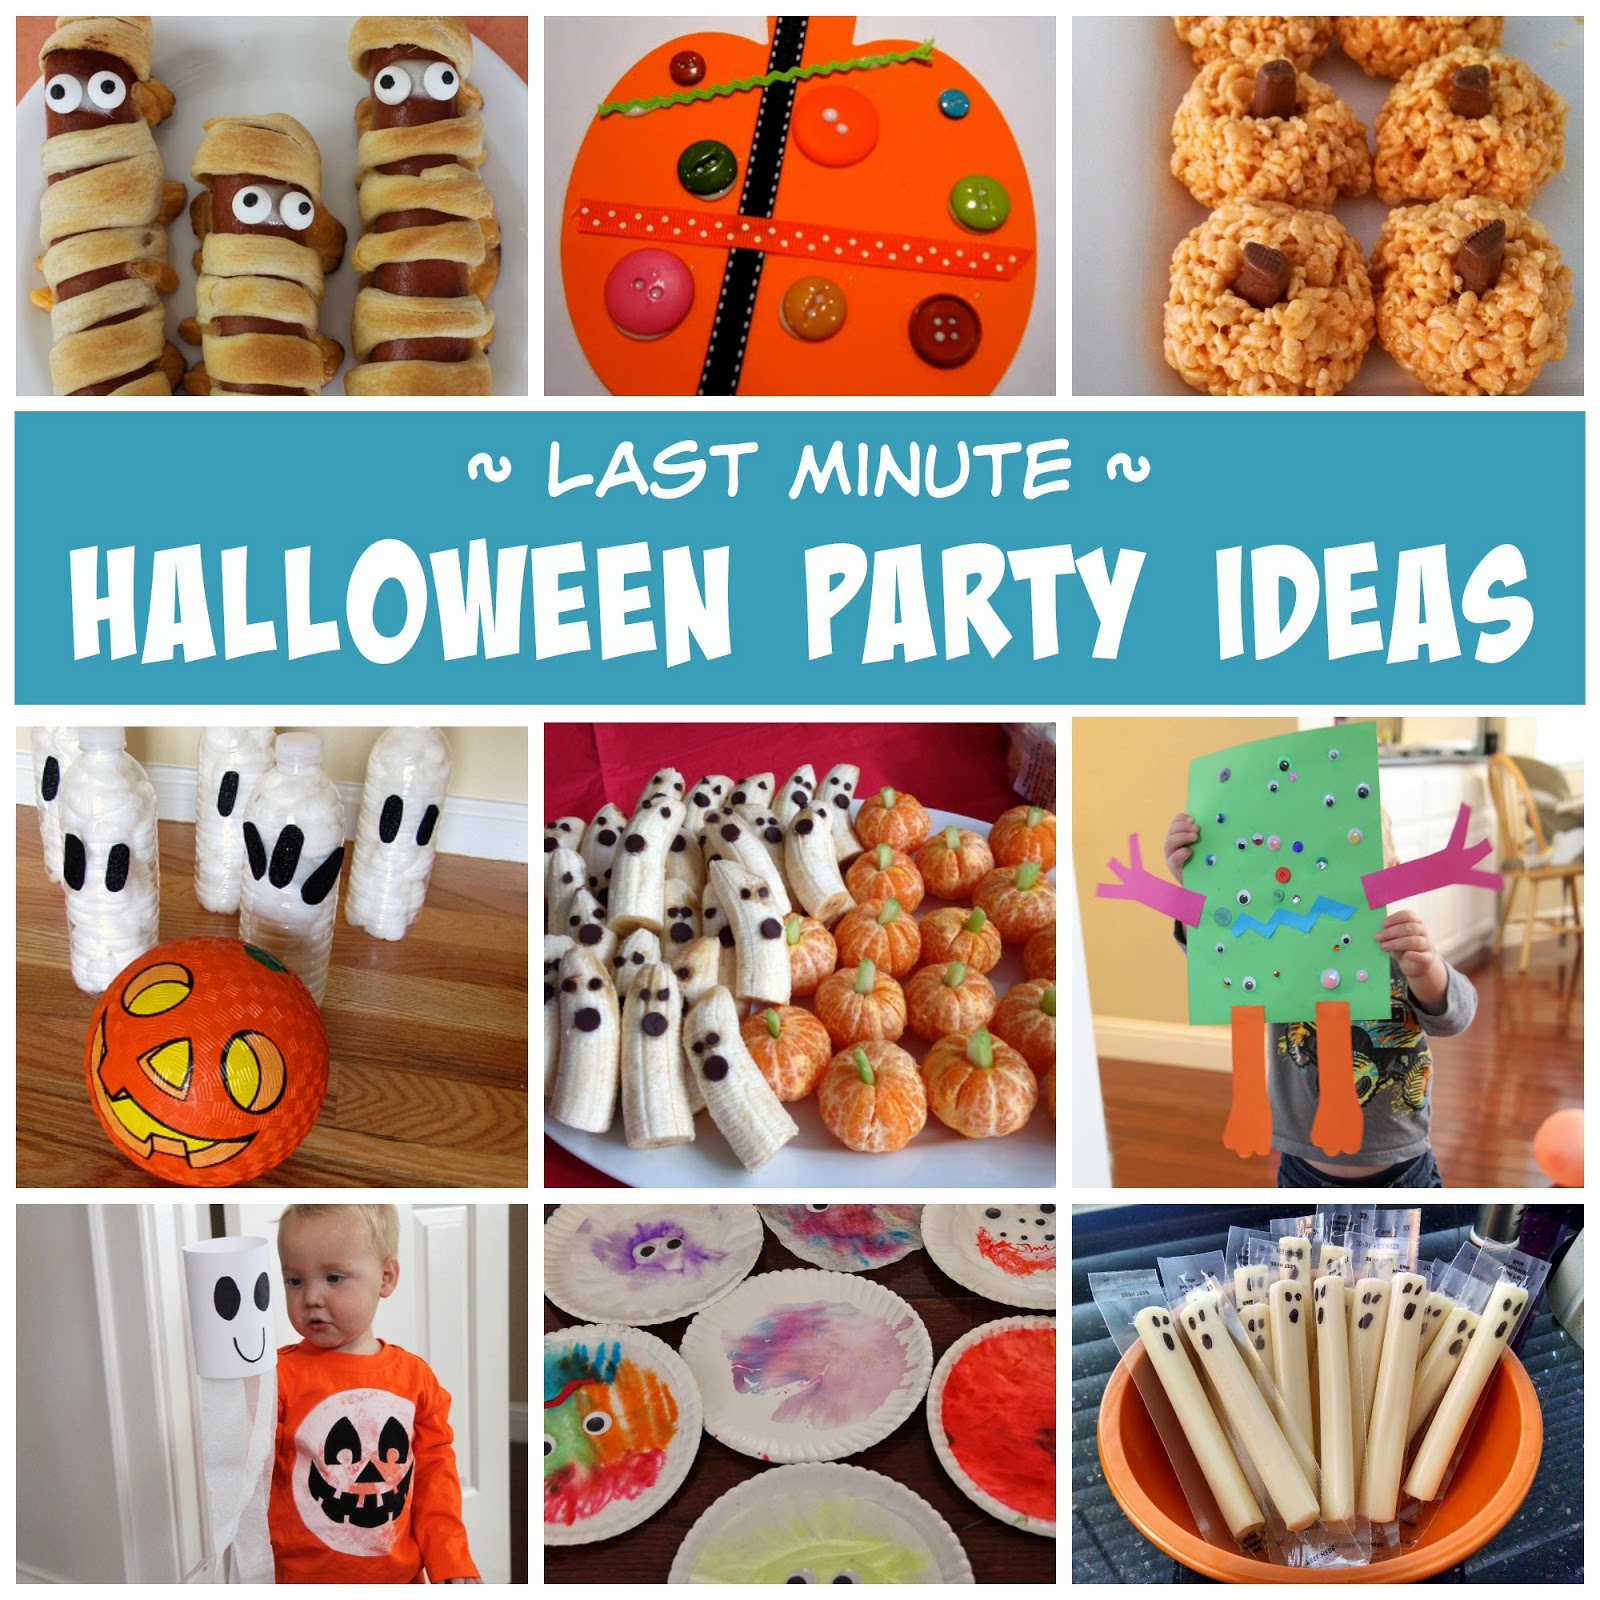 Toddler Approved!: Last Minute Halloween Party Ideas